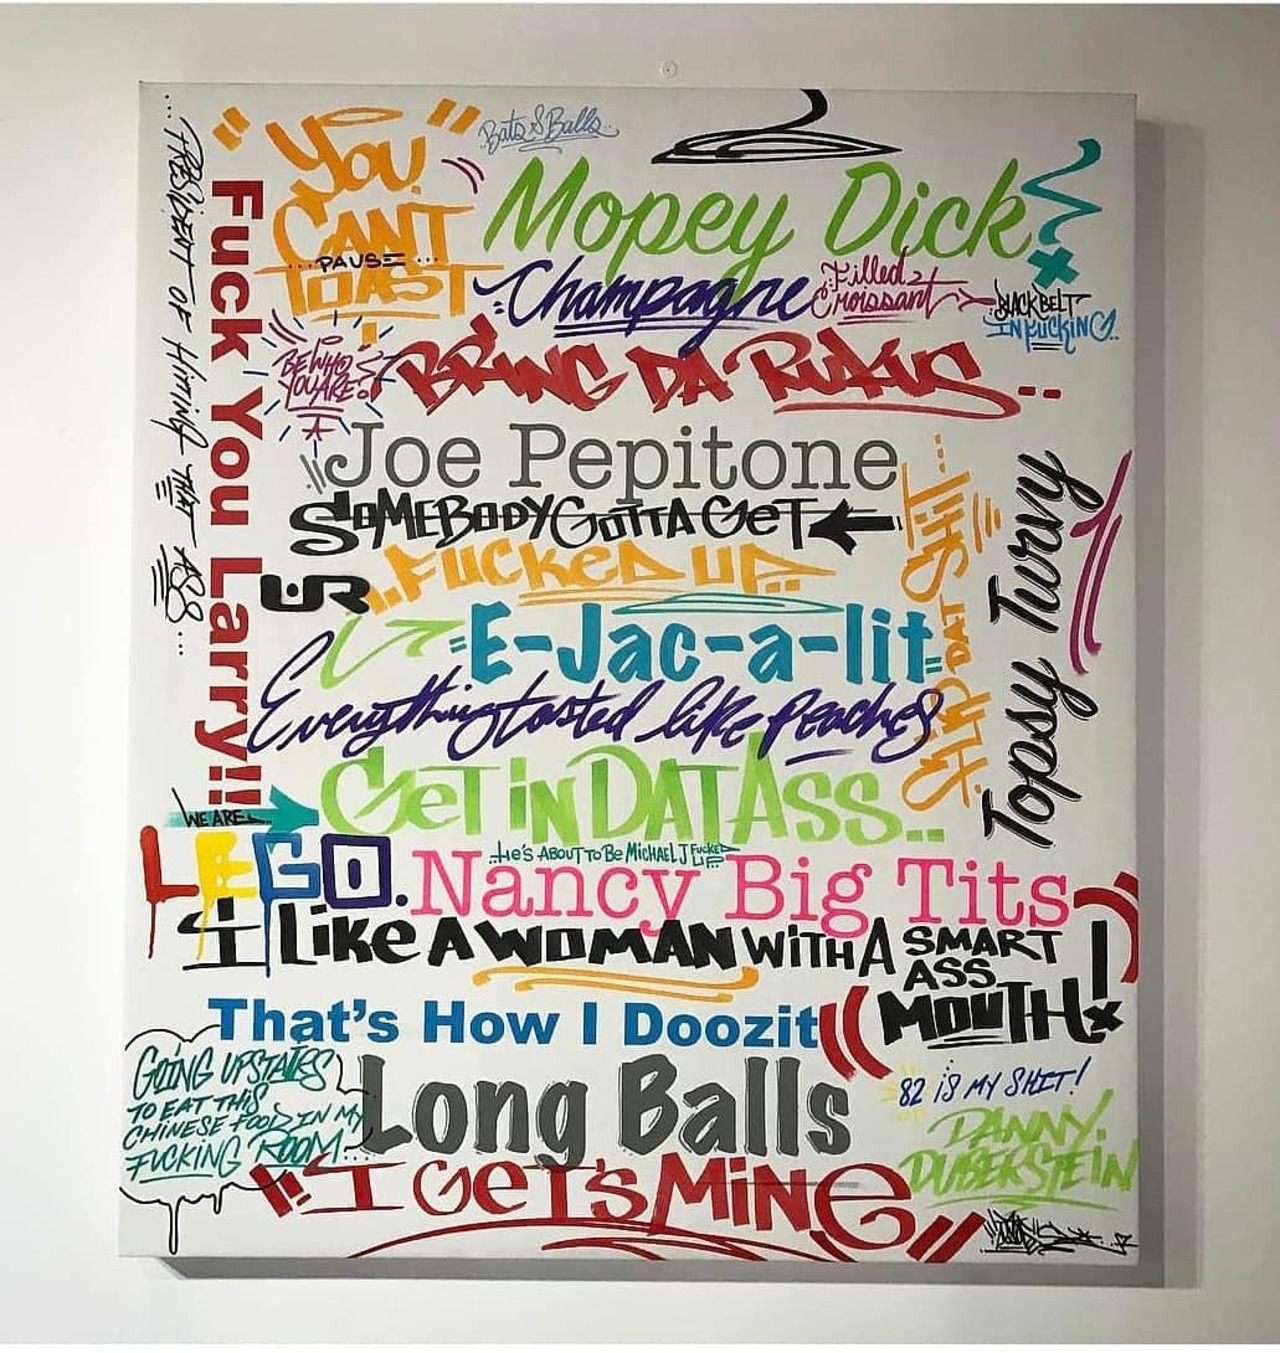 #tbt When my dudes @urnewyork did this all by hand amazing canvas piece filled with all the best of Leon Curb Your Enthusiasm Leonisms! #hbo #bookofleon #curbyourenthusiasm #thatshowidoozit #art #graffiti #improviseyourjourney #canvas Find your favorite. https://t.co/yfUxkGbMRa